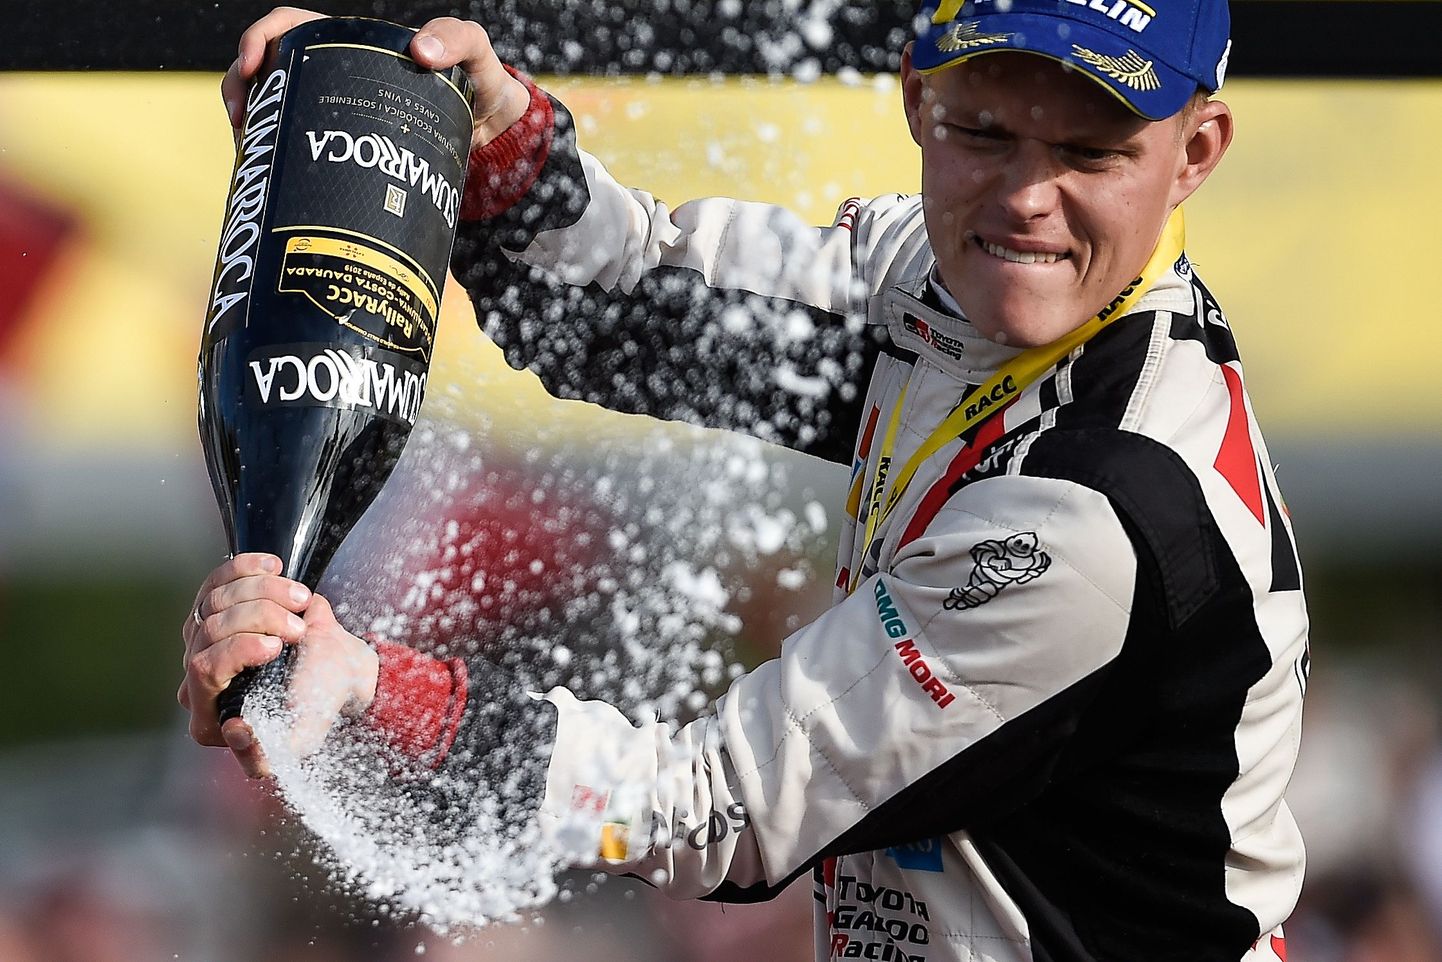 Estonian driver Ott Tanak celebrates with champagne on the podium as he won the 2019 FIA World Rally Championship after finishing second on the 55th Catalonia 2019 FIA World Rally Championship on October 27, 2019 in Salou, near Tarragona.